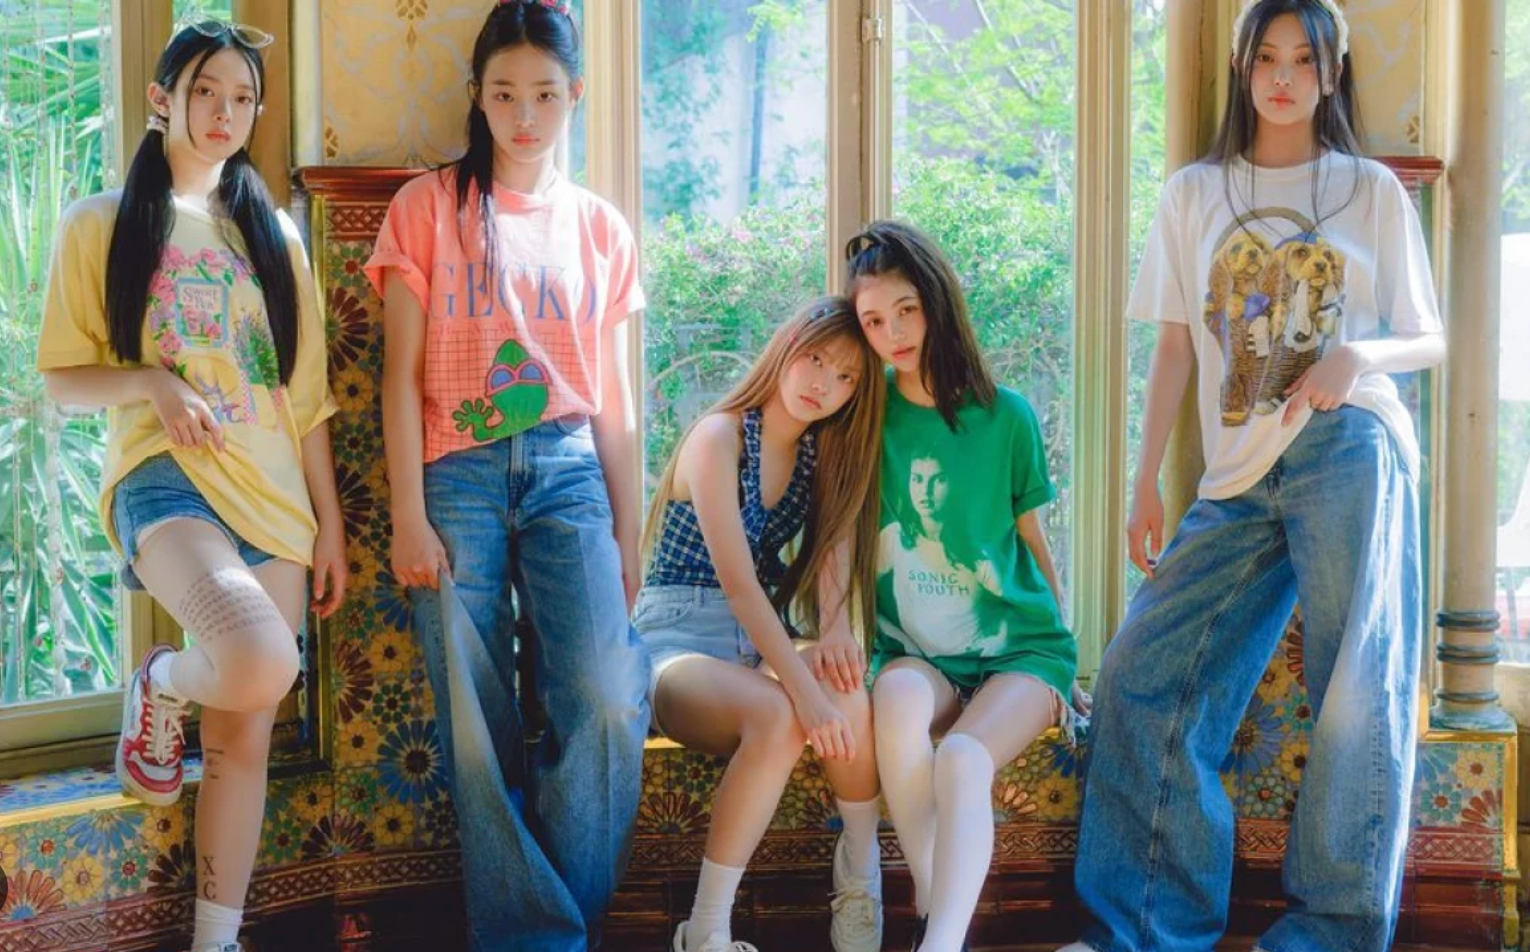 NewJeans says they're more than solely K-pop stars as they break global  barriers